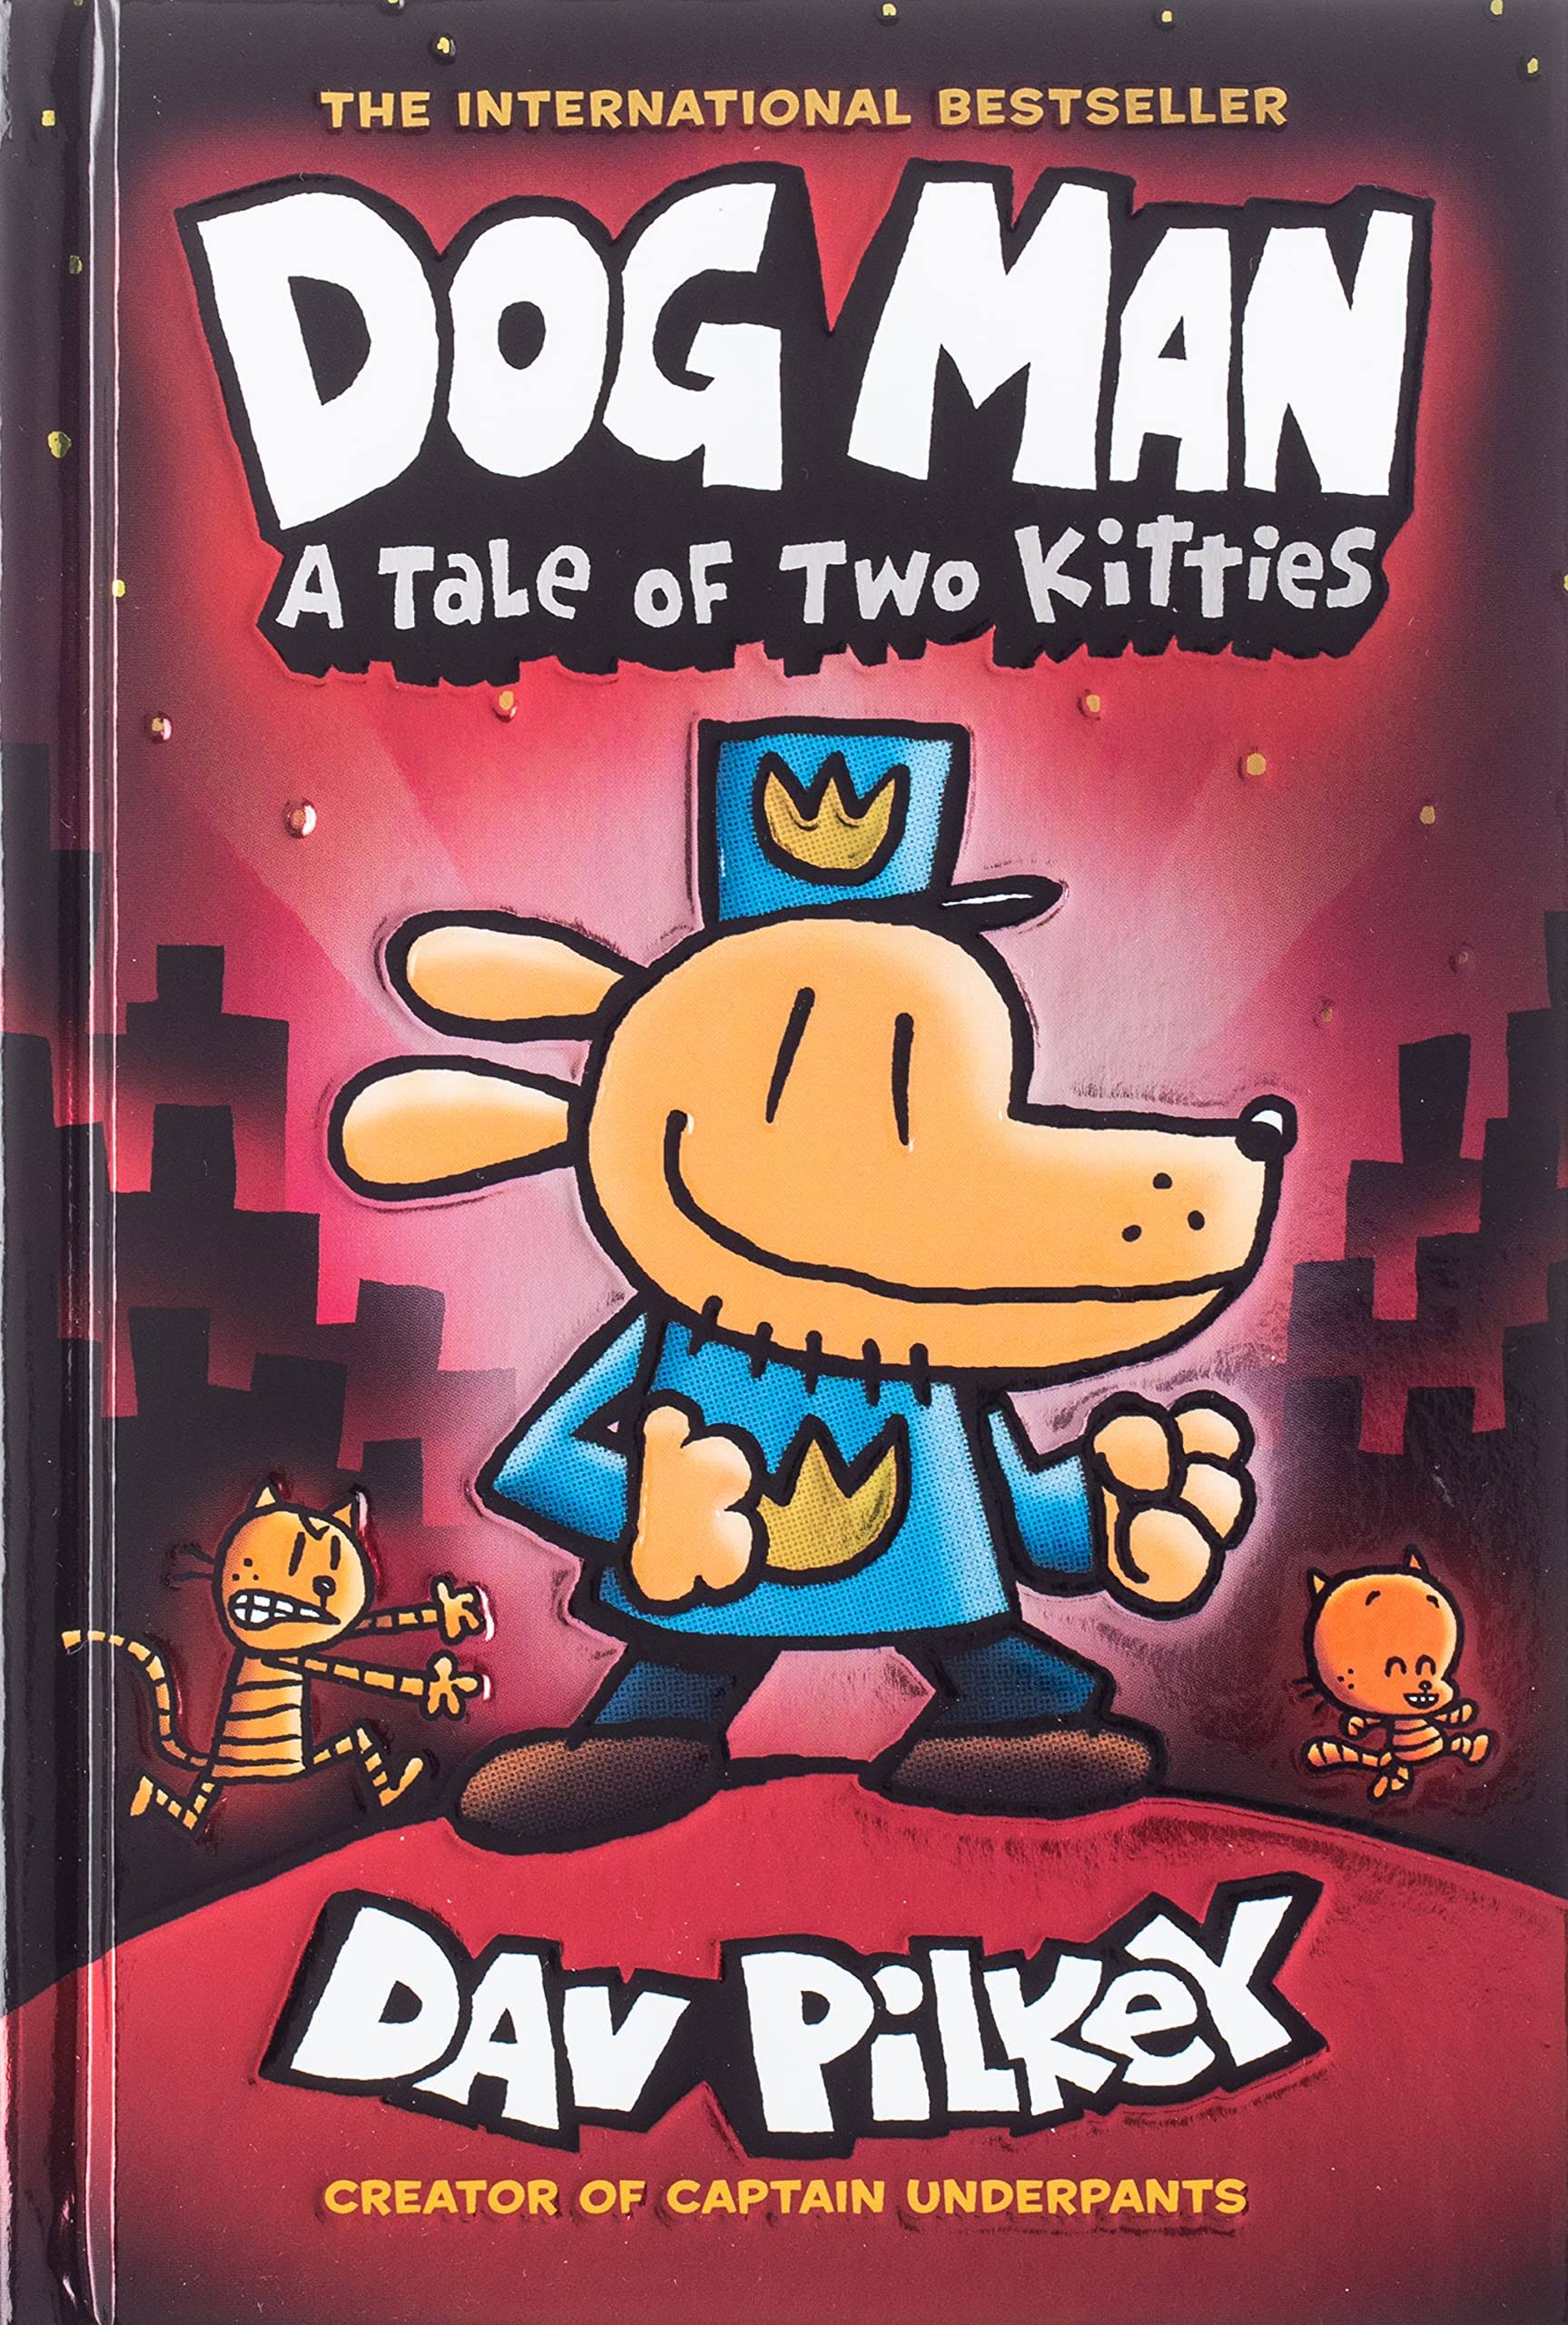 Dog Man: A Tale of Two Kitties [Book]